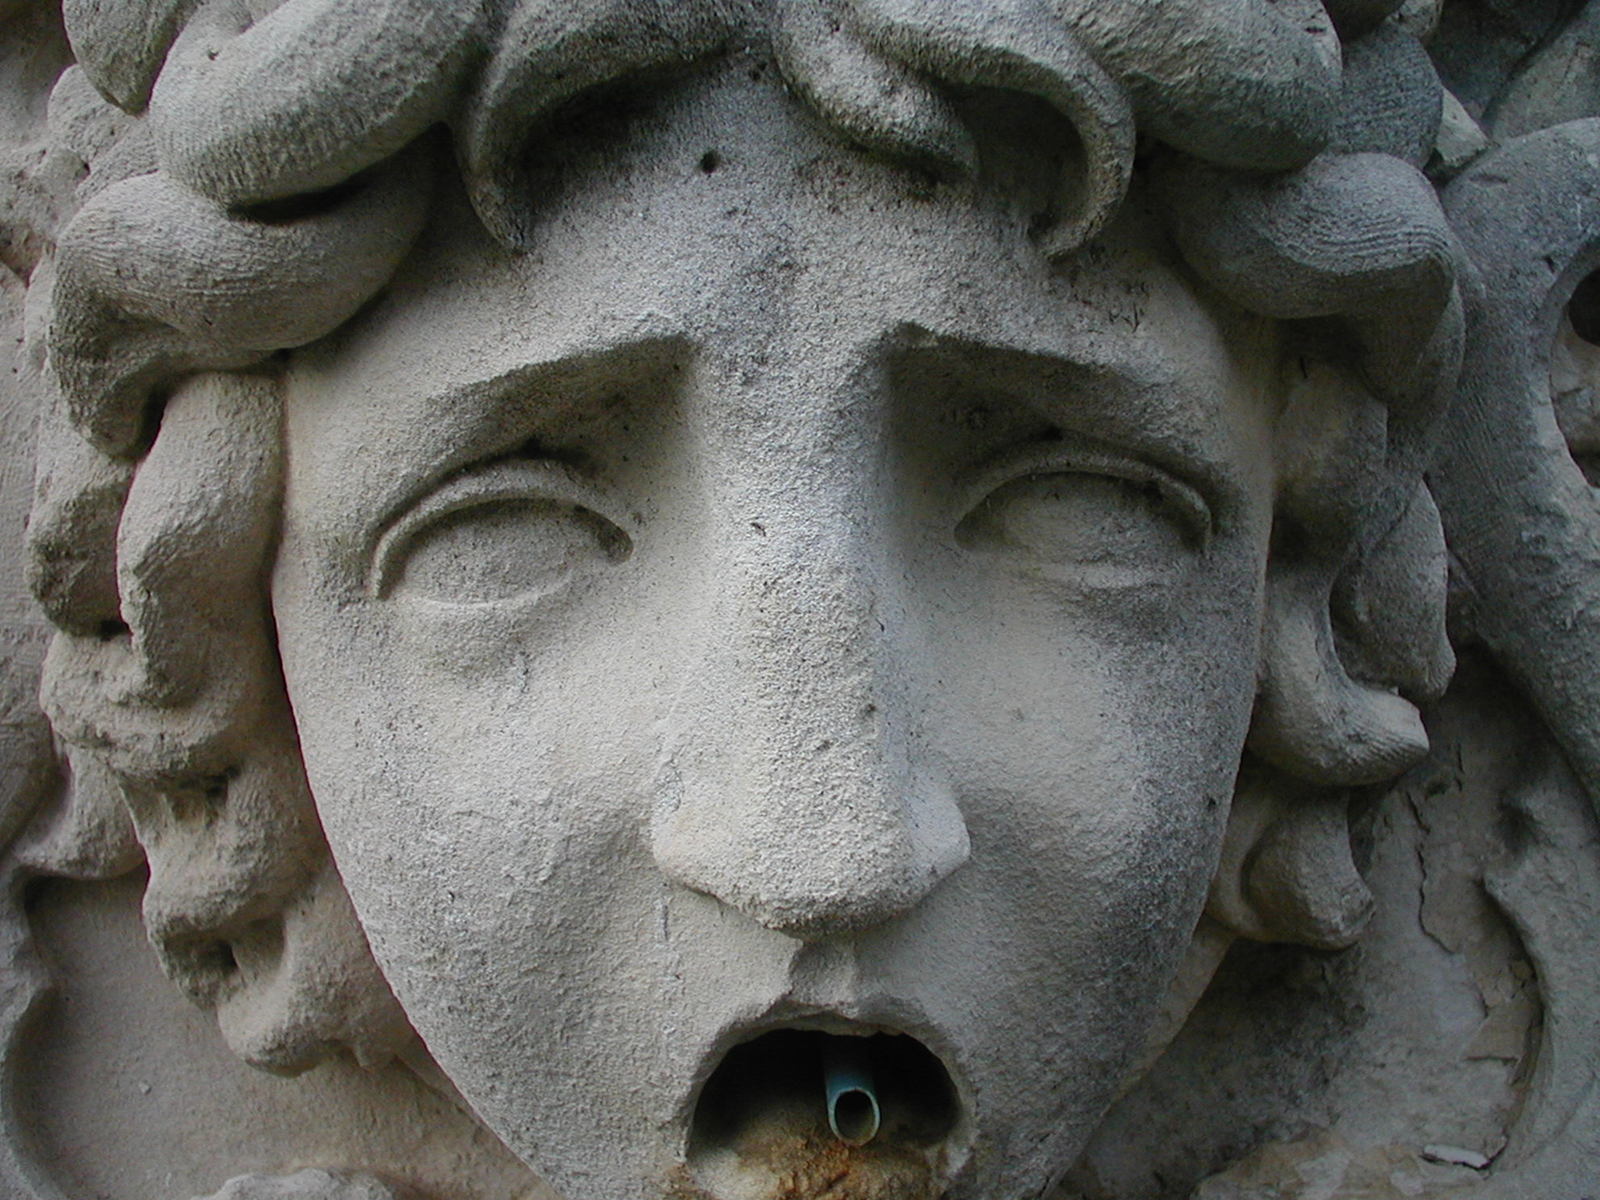 this sculpture has an open mouth and eyes